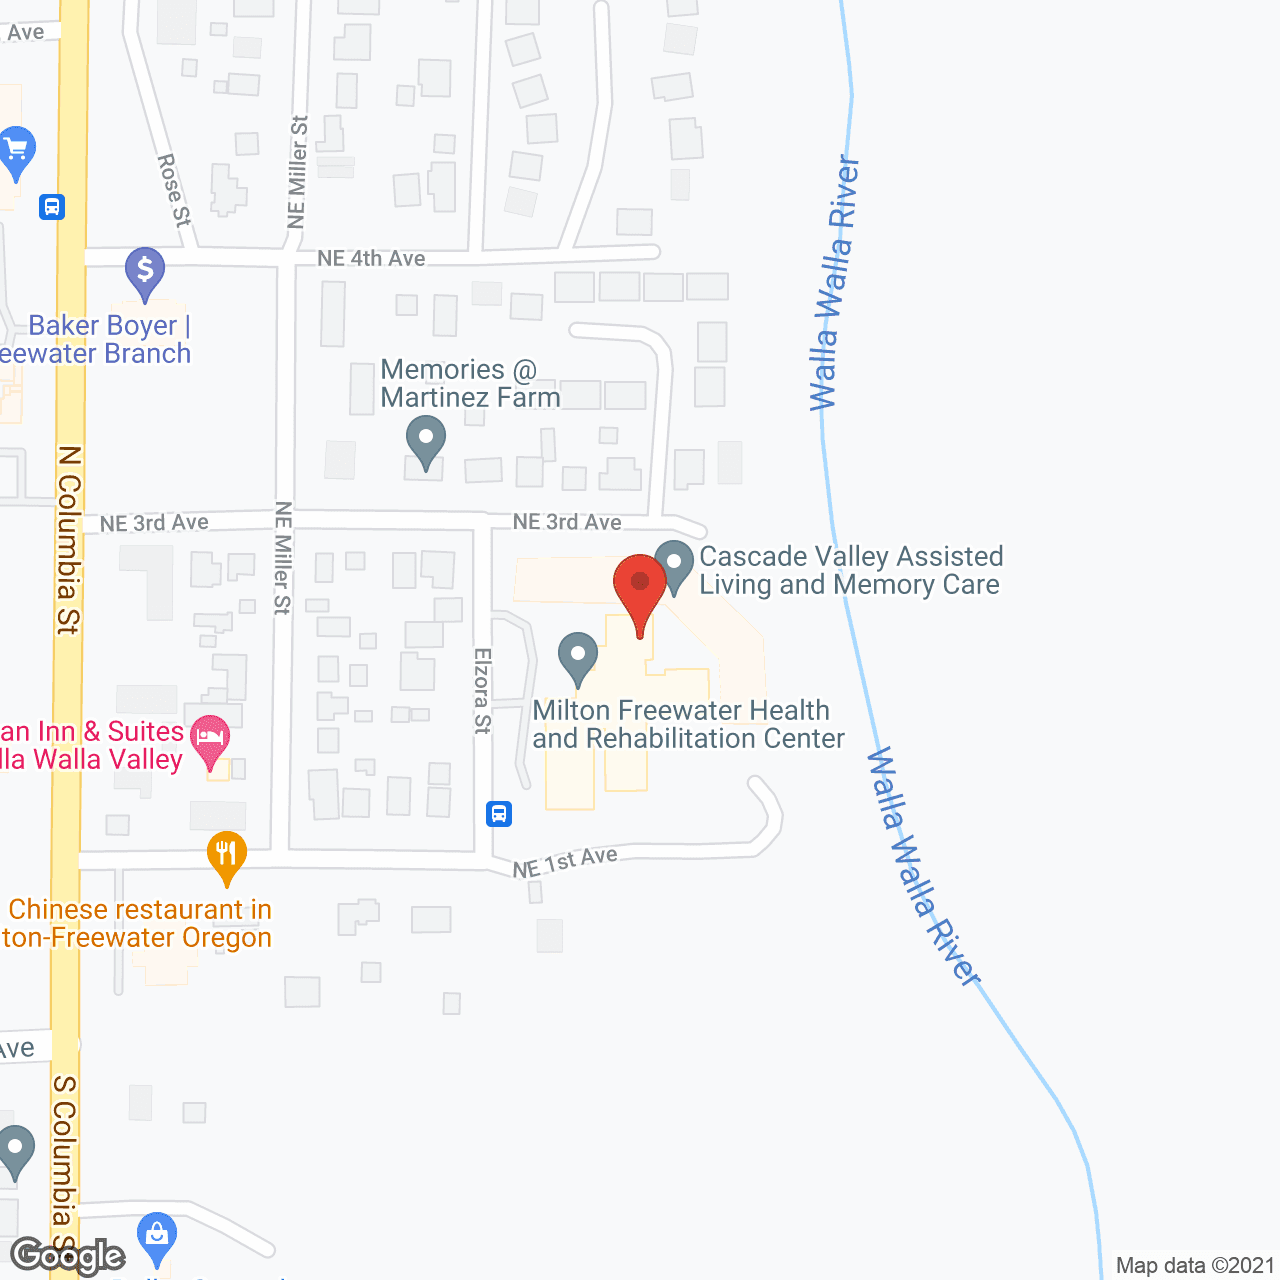 Cascade Valley Assisted Living and Memory Care in google map